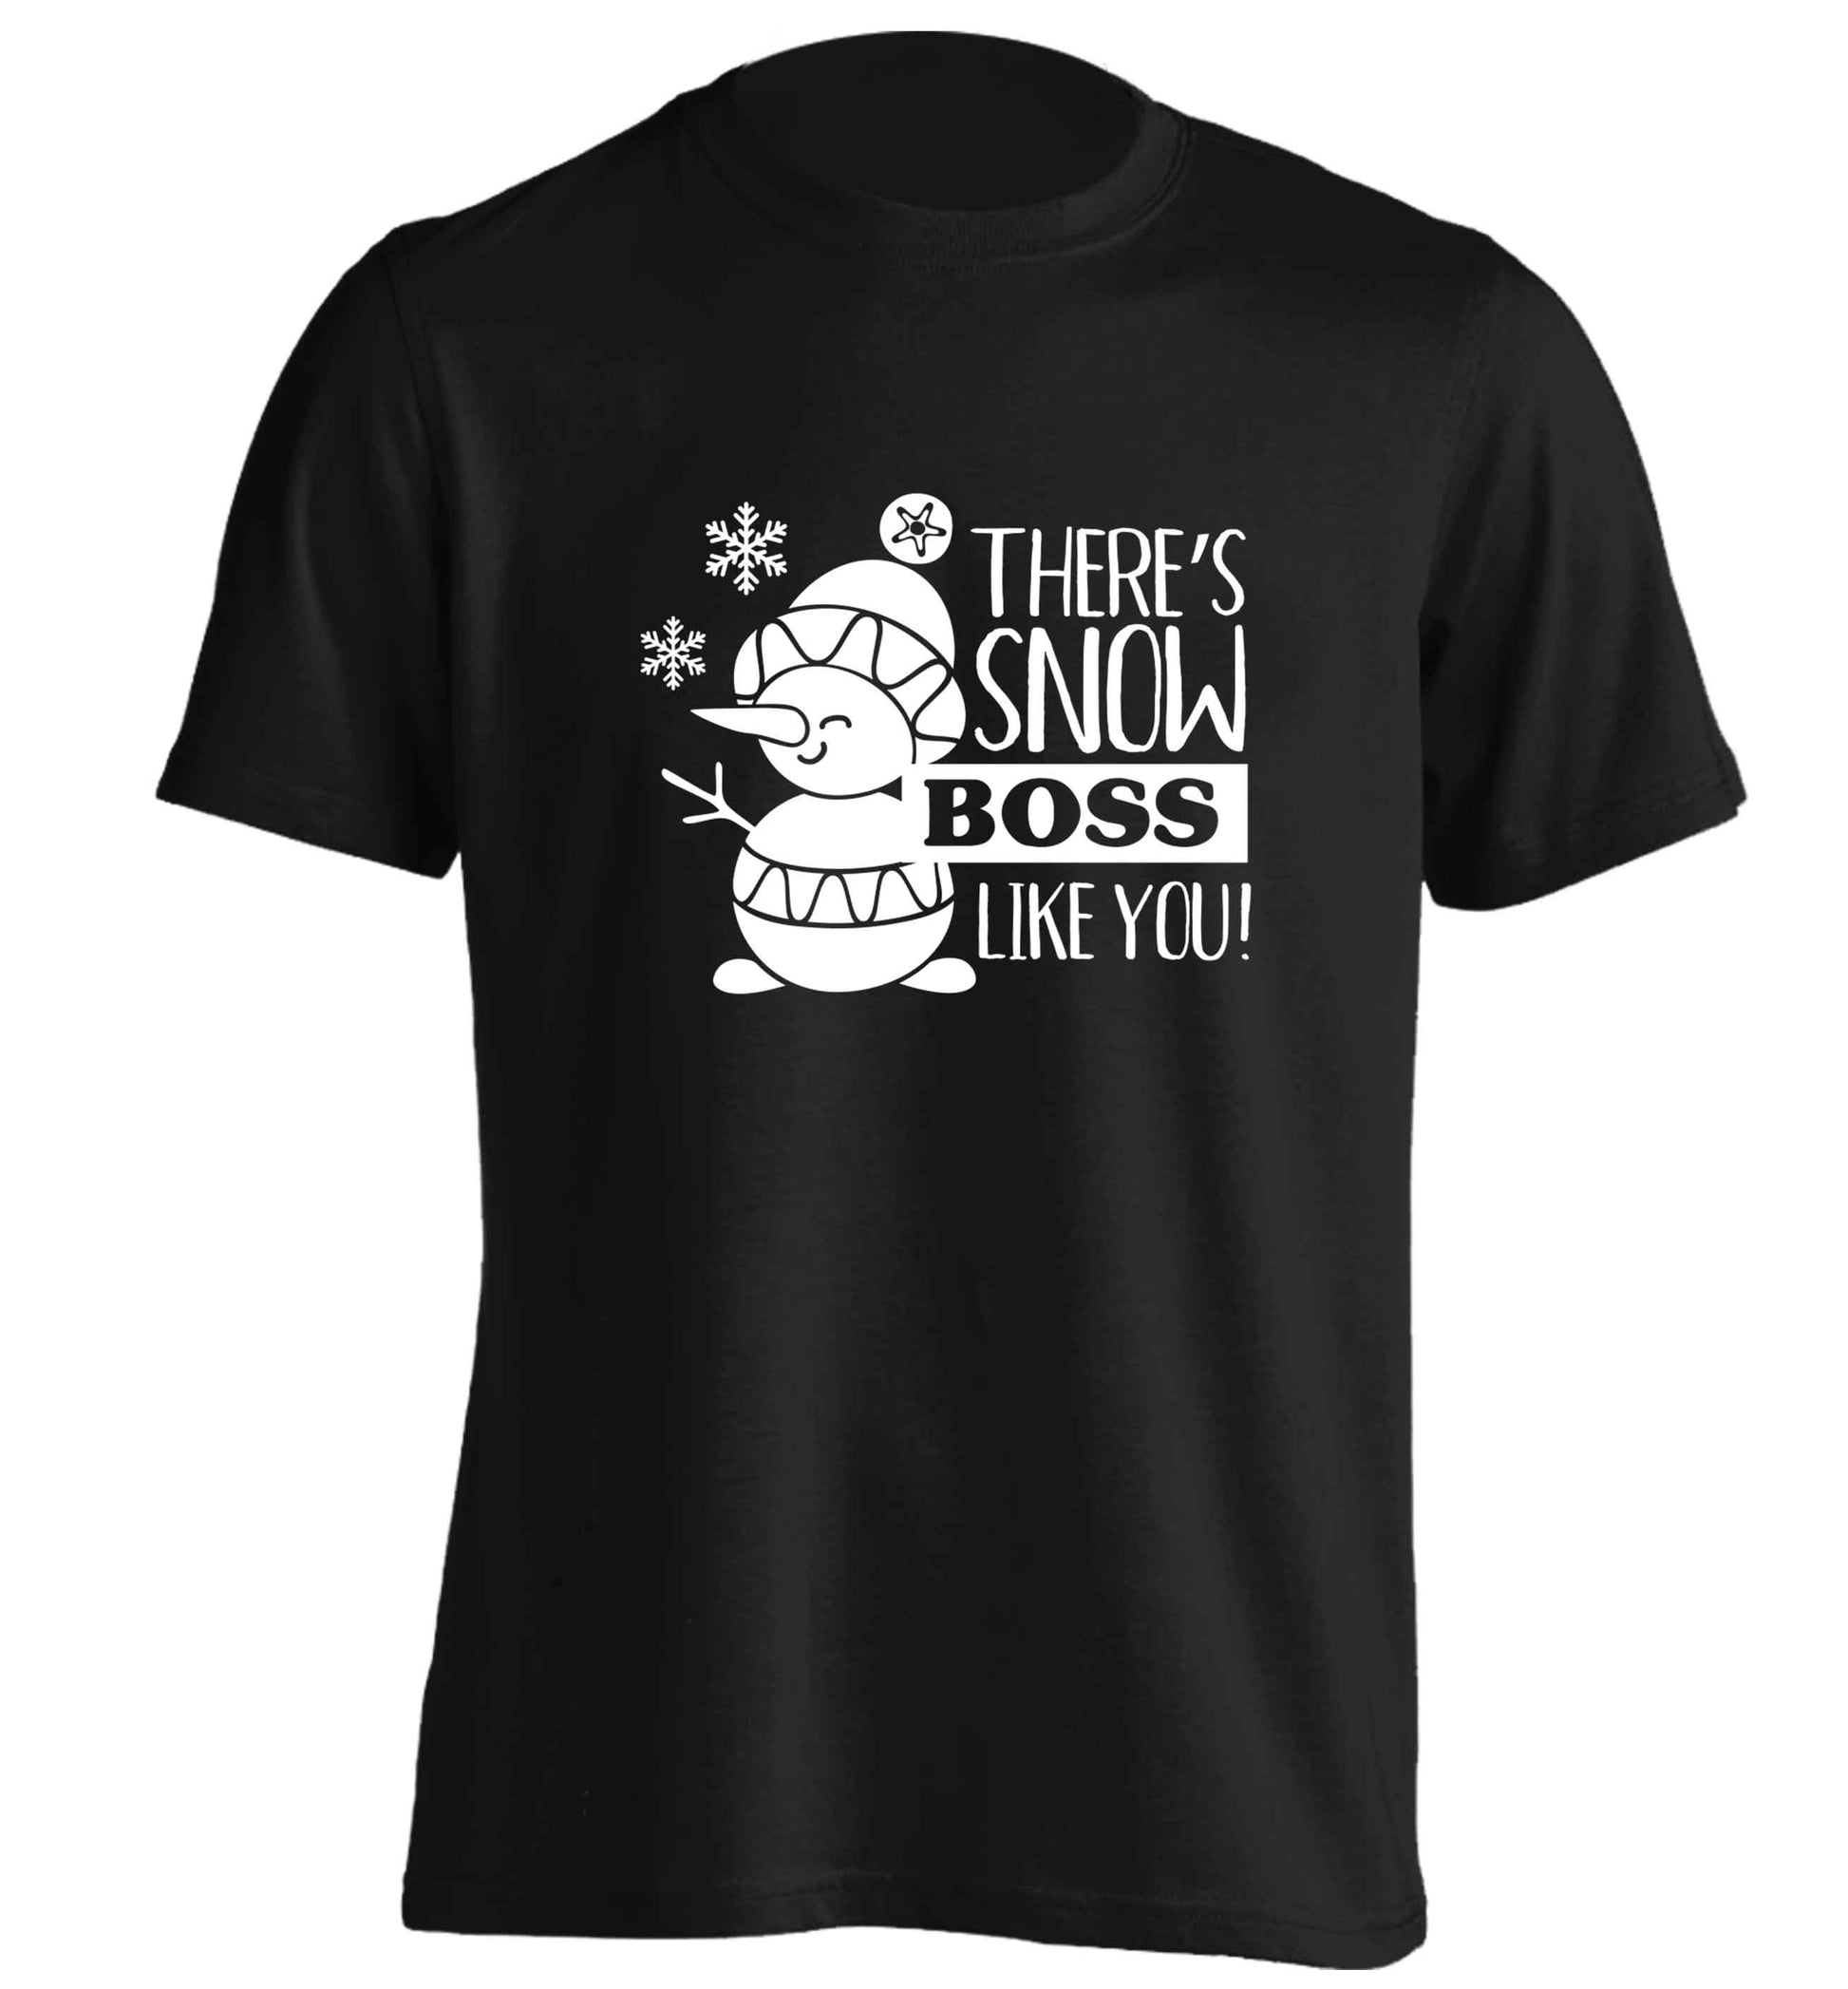 There's snow boss like you adults unisex black Tshirt 2XL